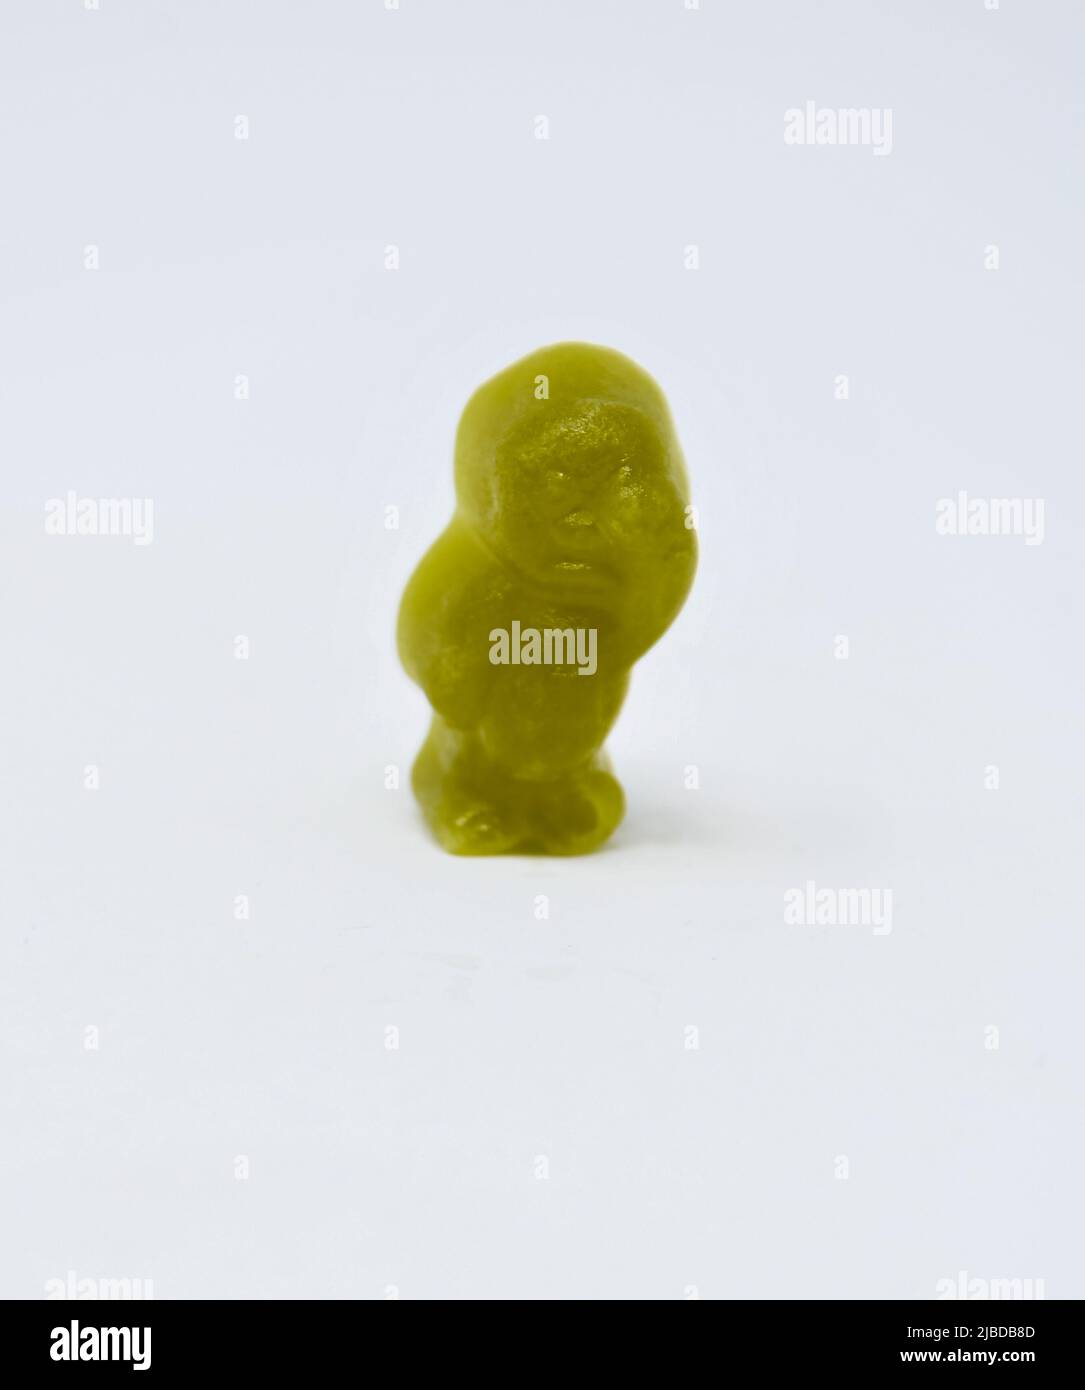 A close up photo of a Green Jelly baby Stock Photo